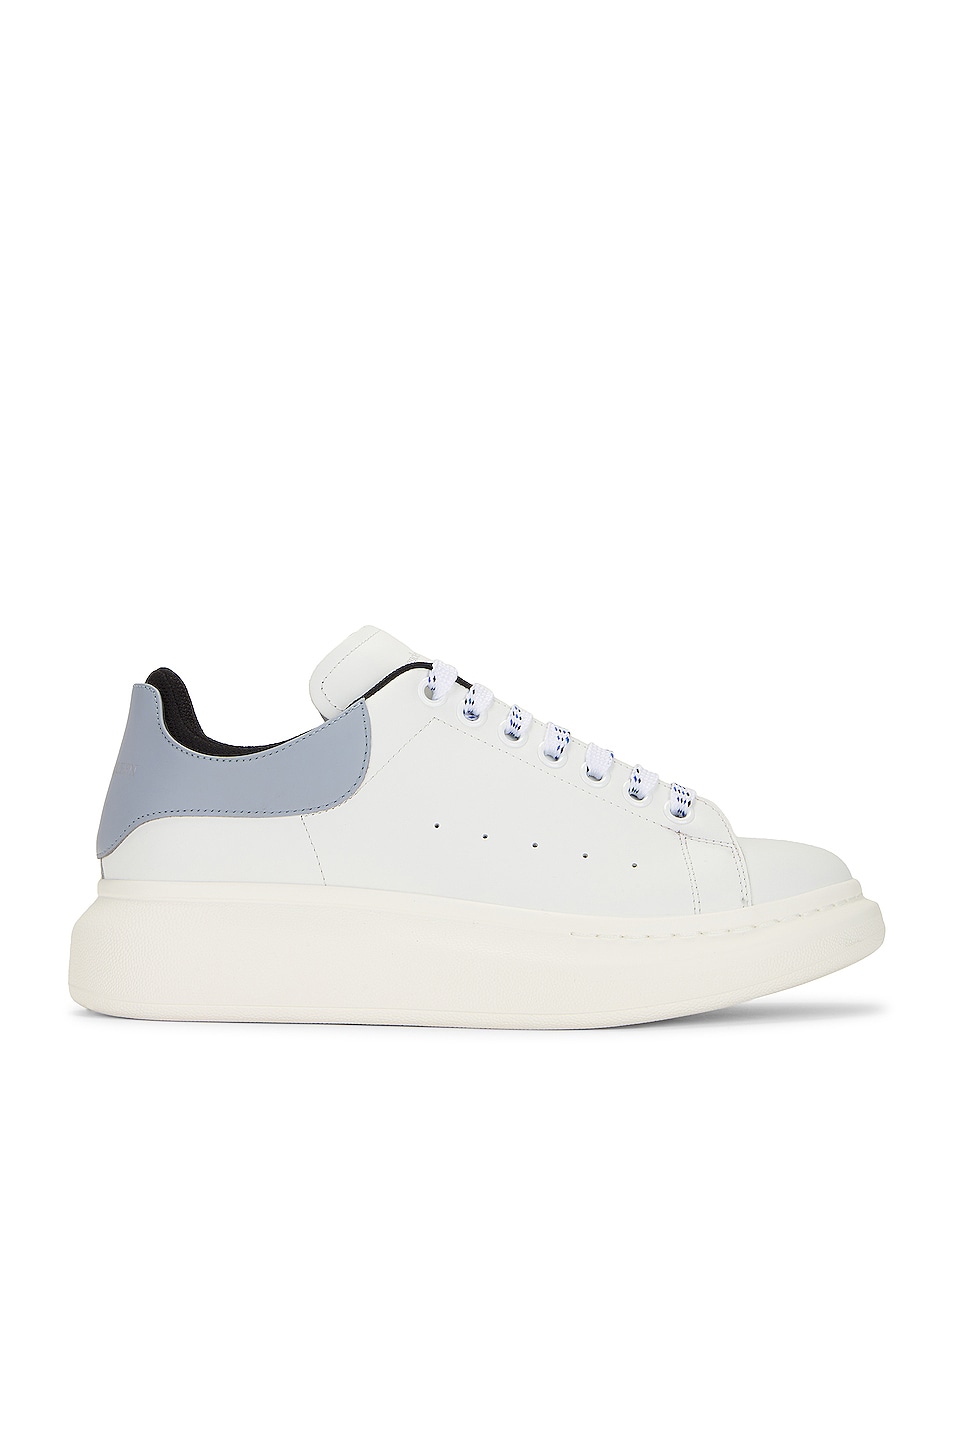 Image 1 of Alexander McQueen Leather Sneaker in White & Blue